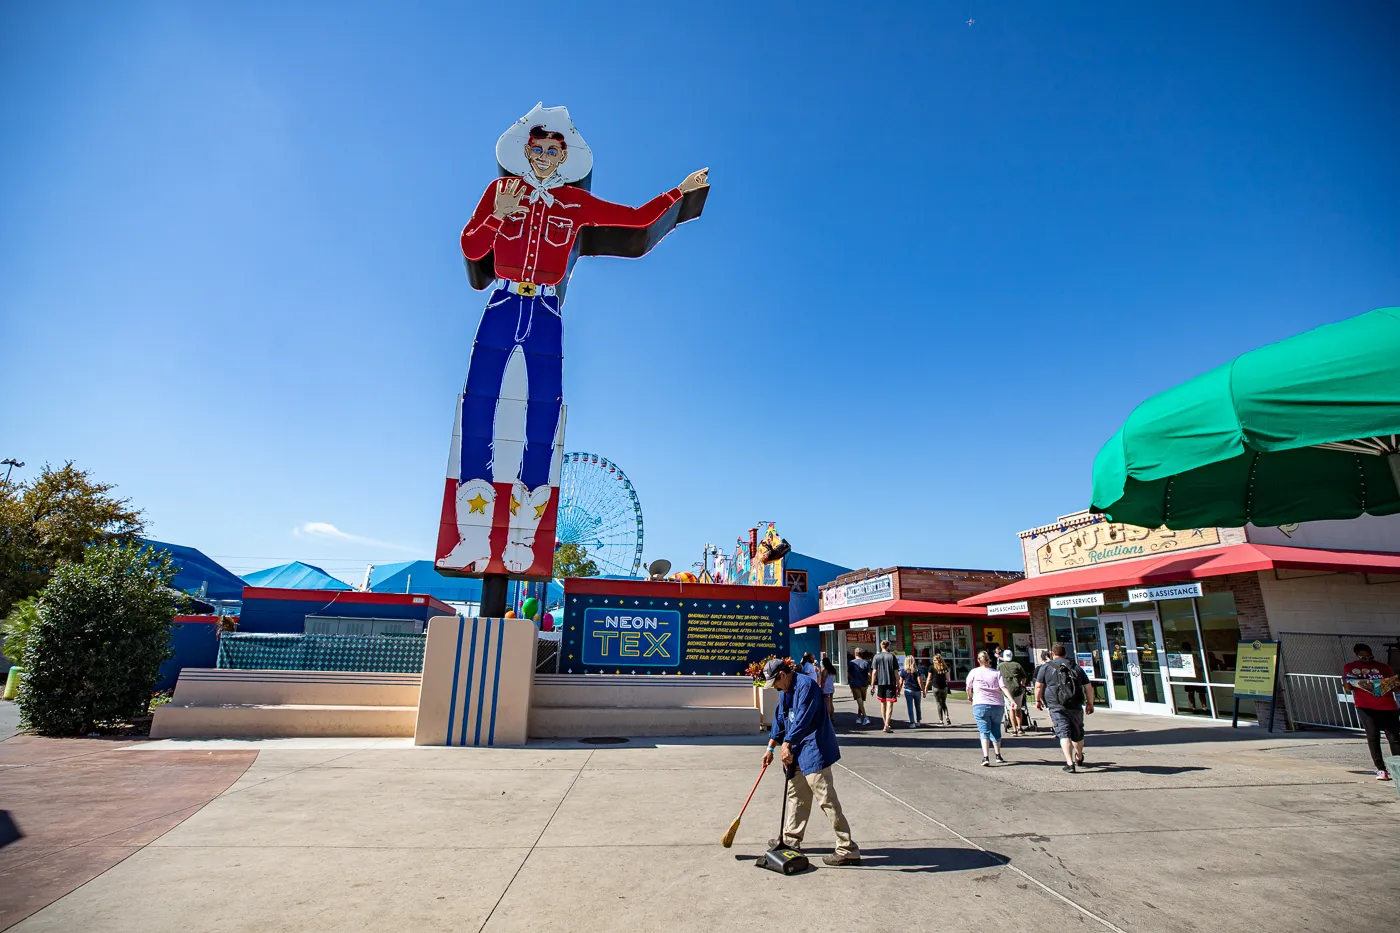 Neon Big Tex at the State Fair of Texas